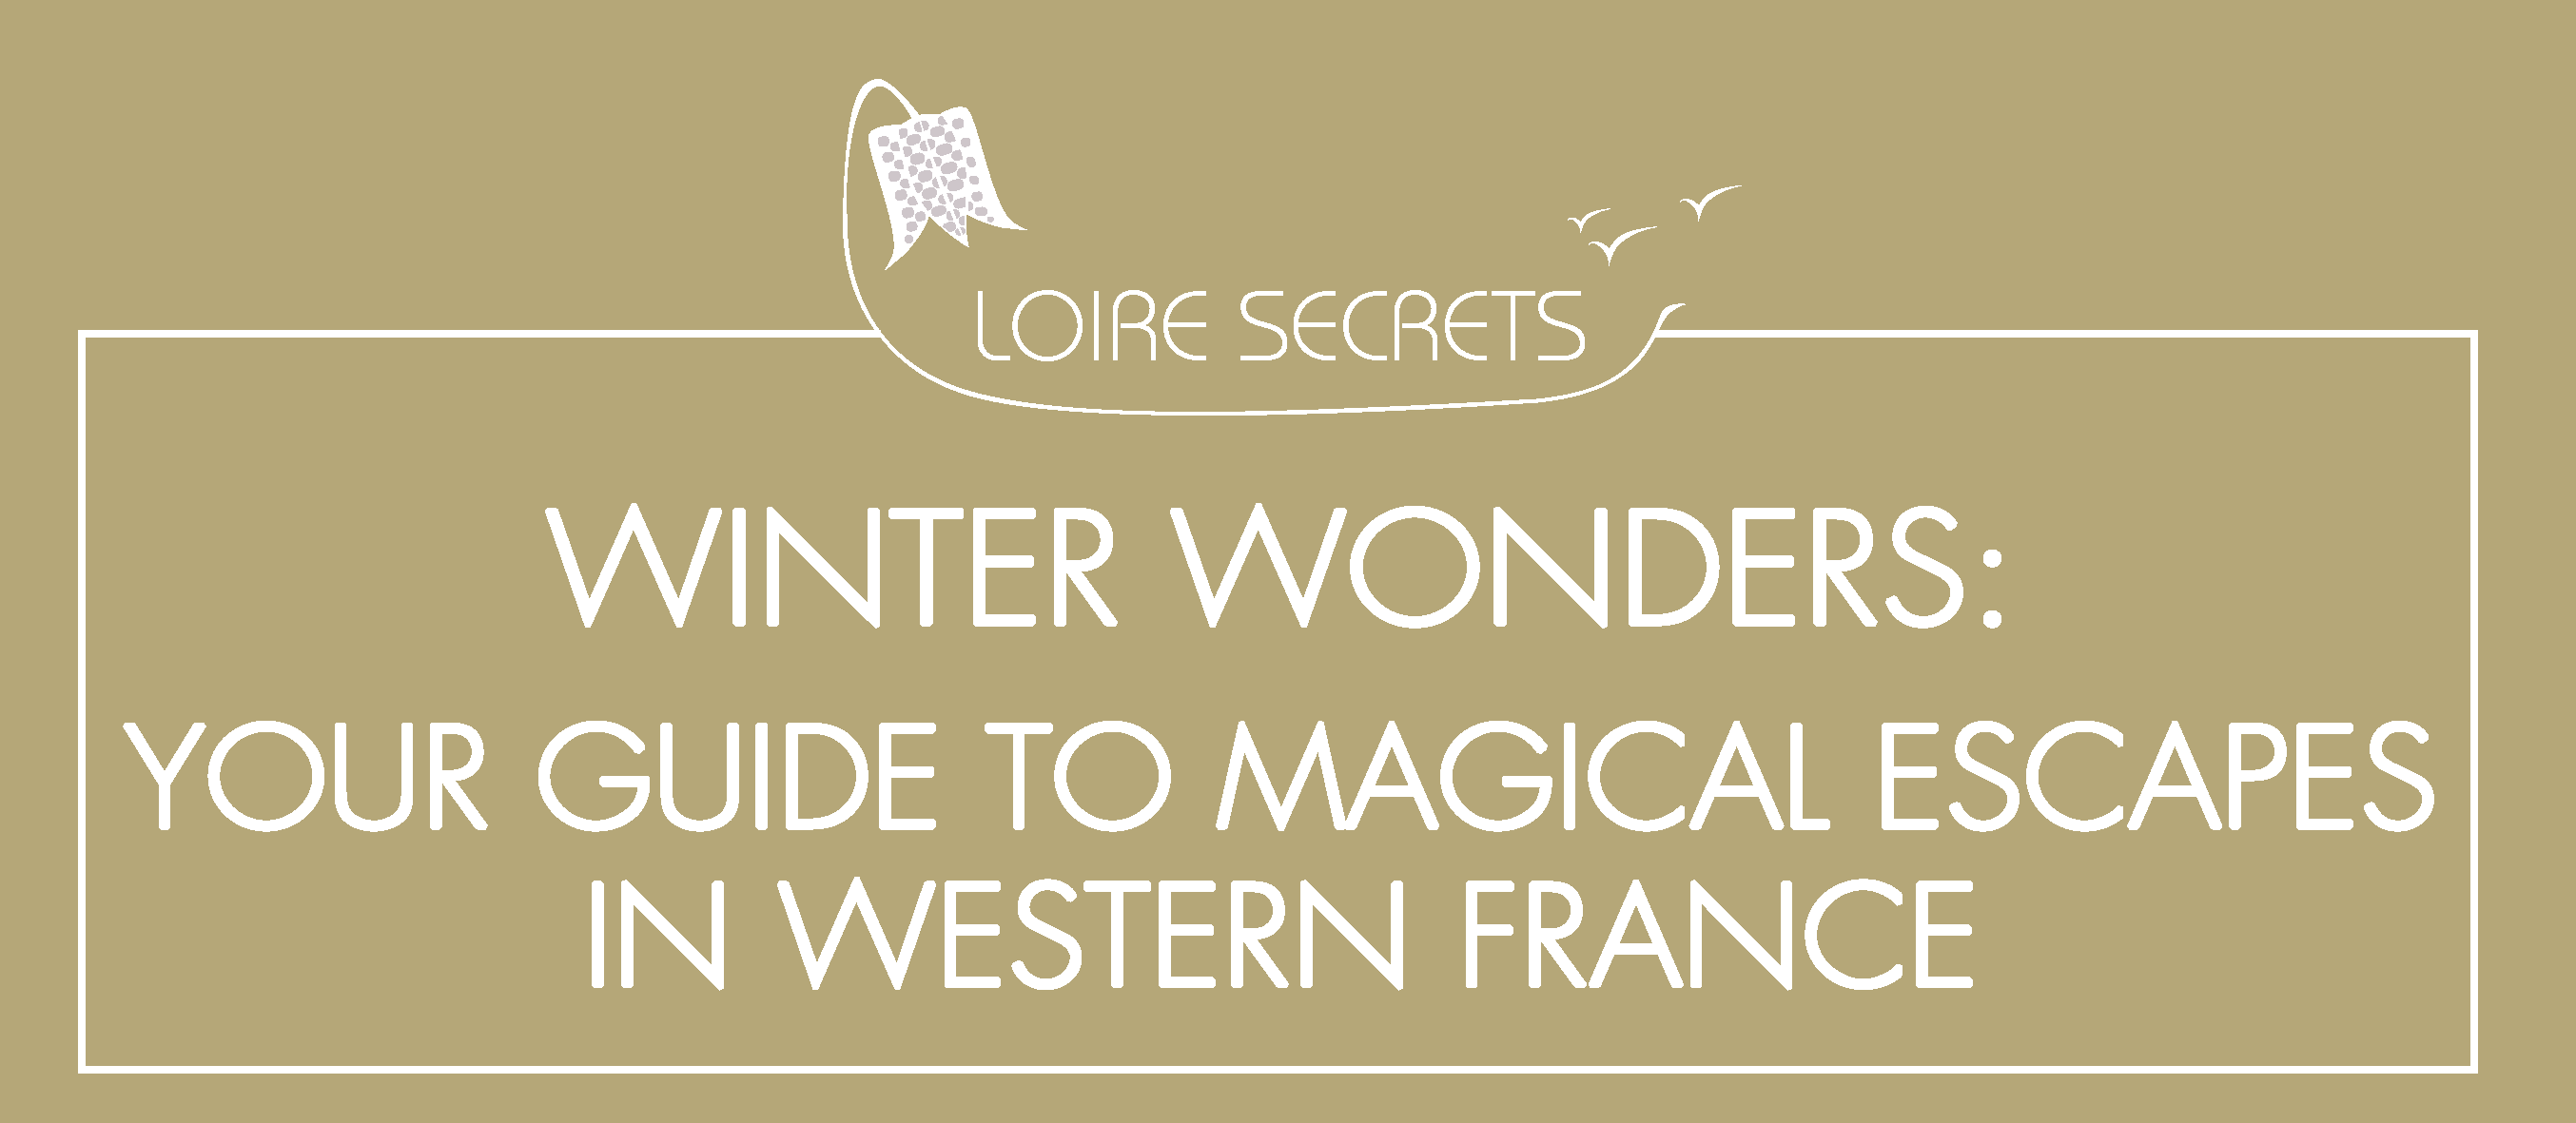 You are currently viewing Winter Wonders: Your Guide to Magical Escapes in Western France